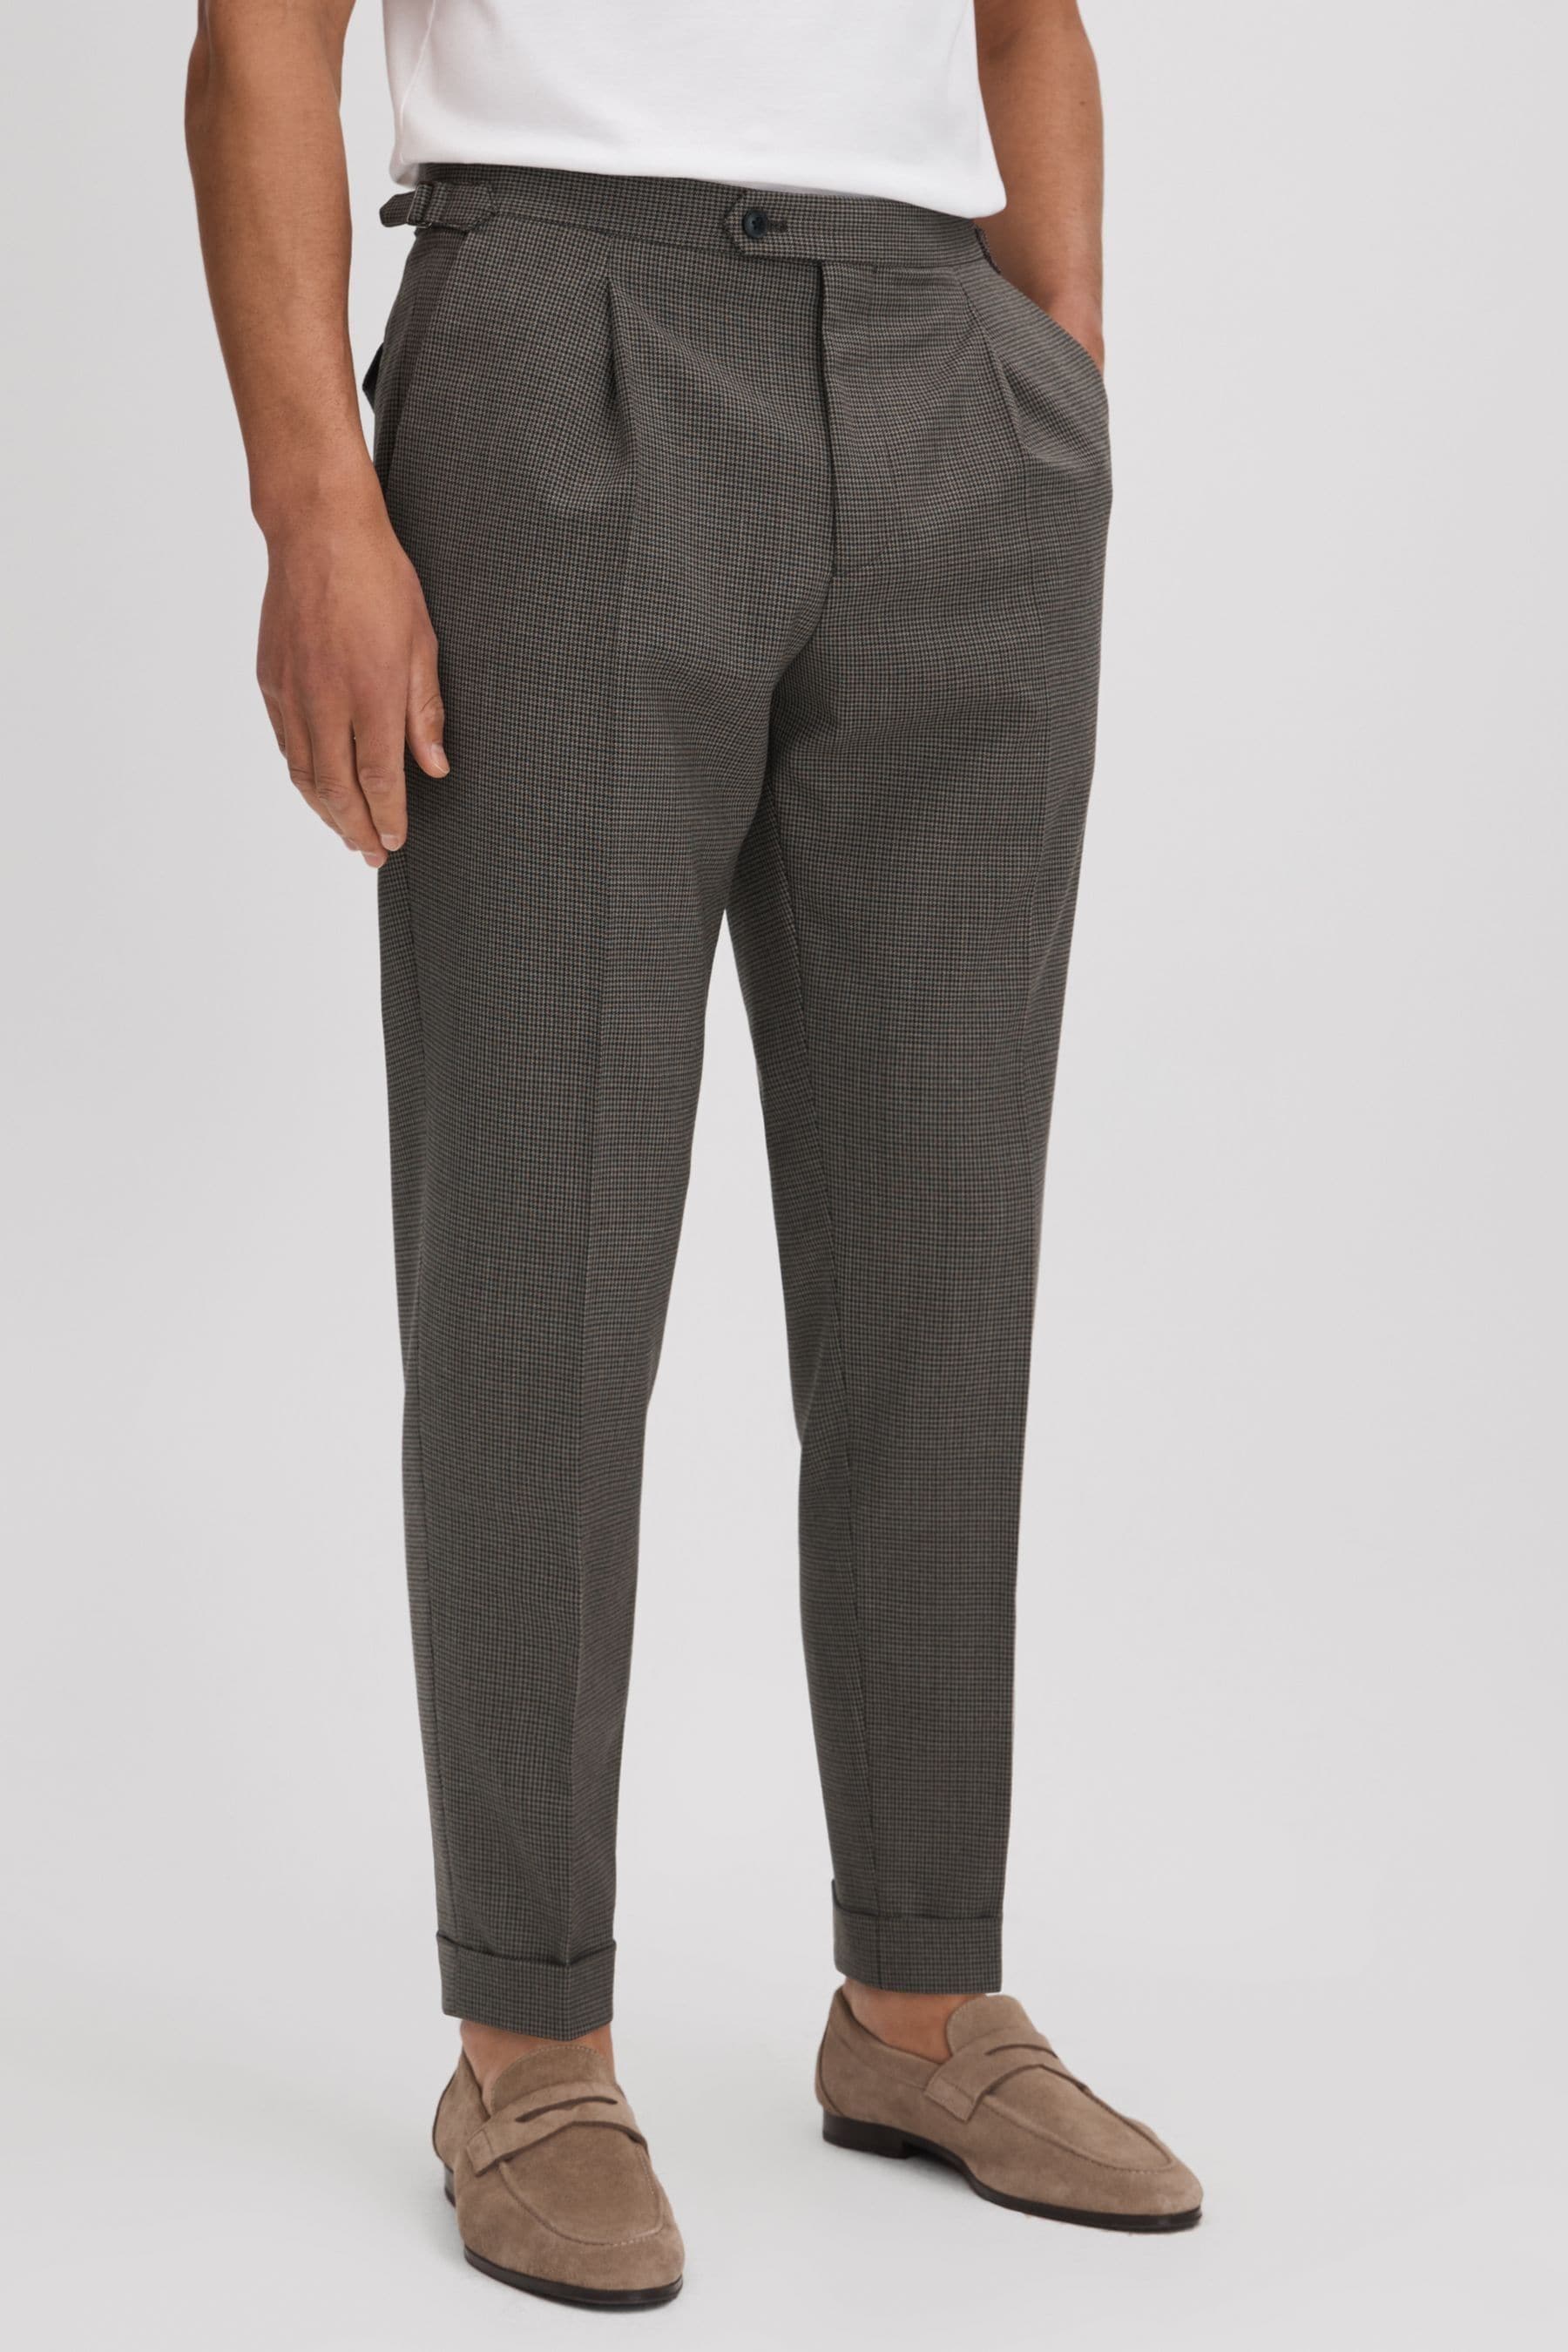 Reiss Rumble - Brown Slim Fit Wool Blend Puppytooth Trousers, 38